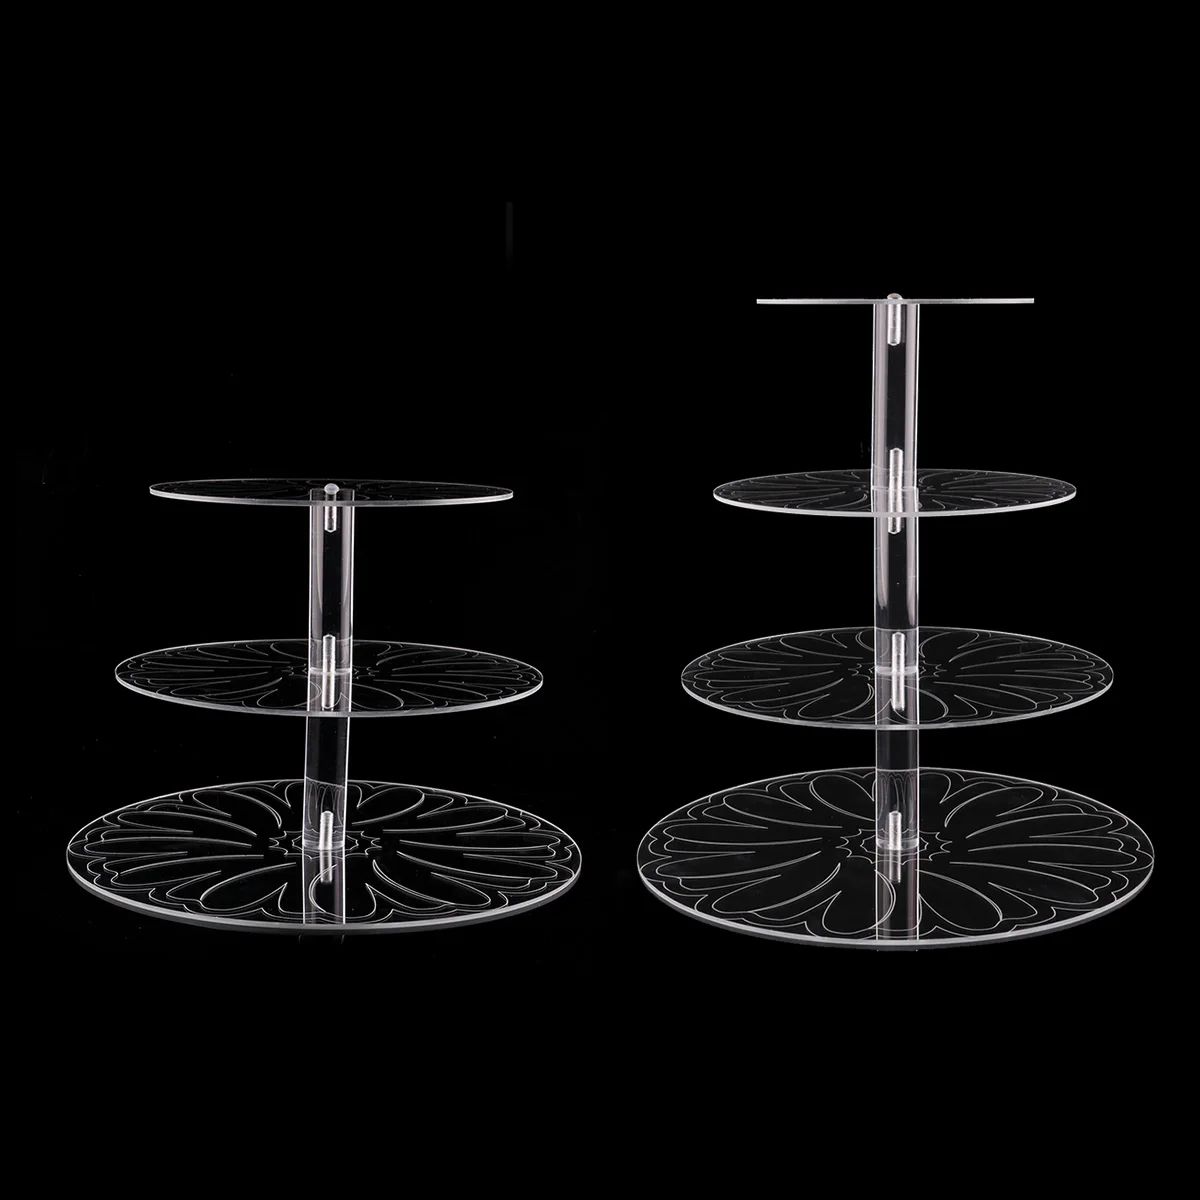 

2021 New Acrylic Pattern Cake Stand Without Packaging For Weddings Bread Baking Tools Placed Creativity Sell Like Hot Cakes